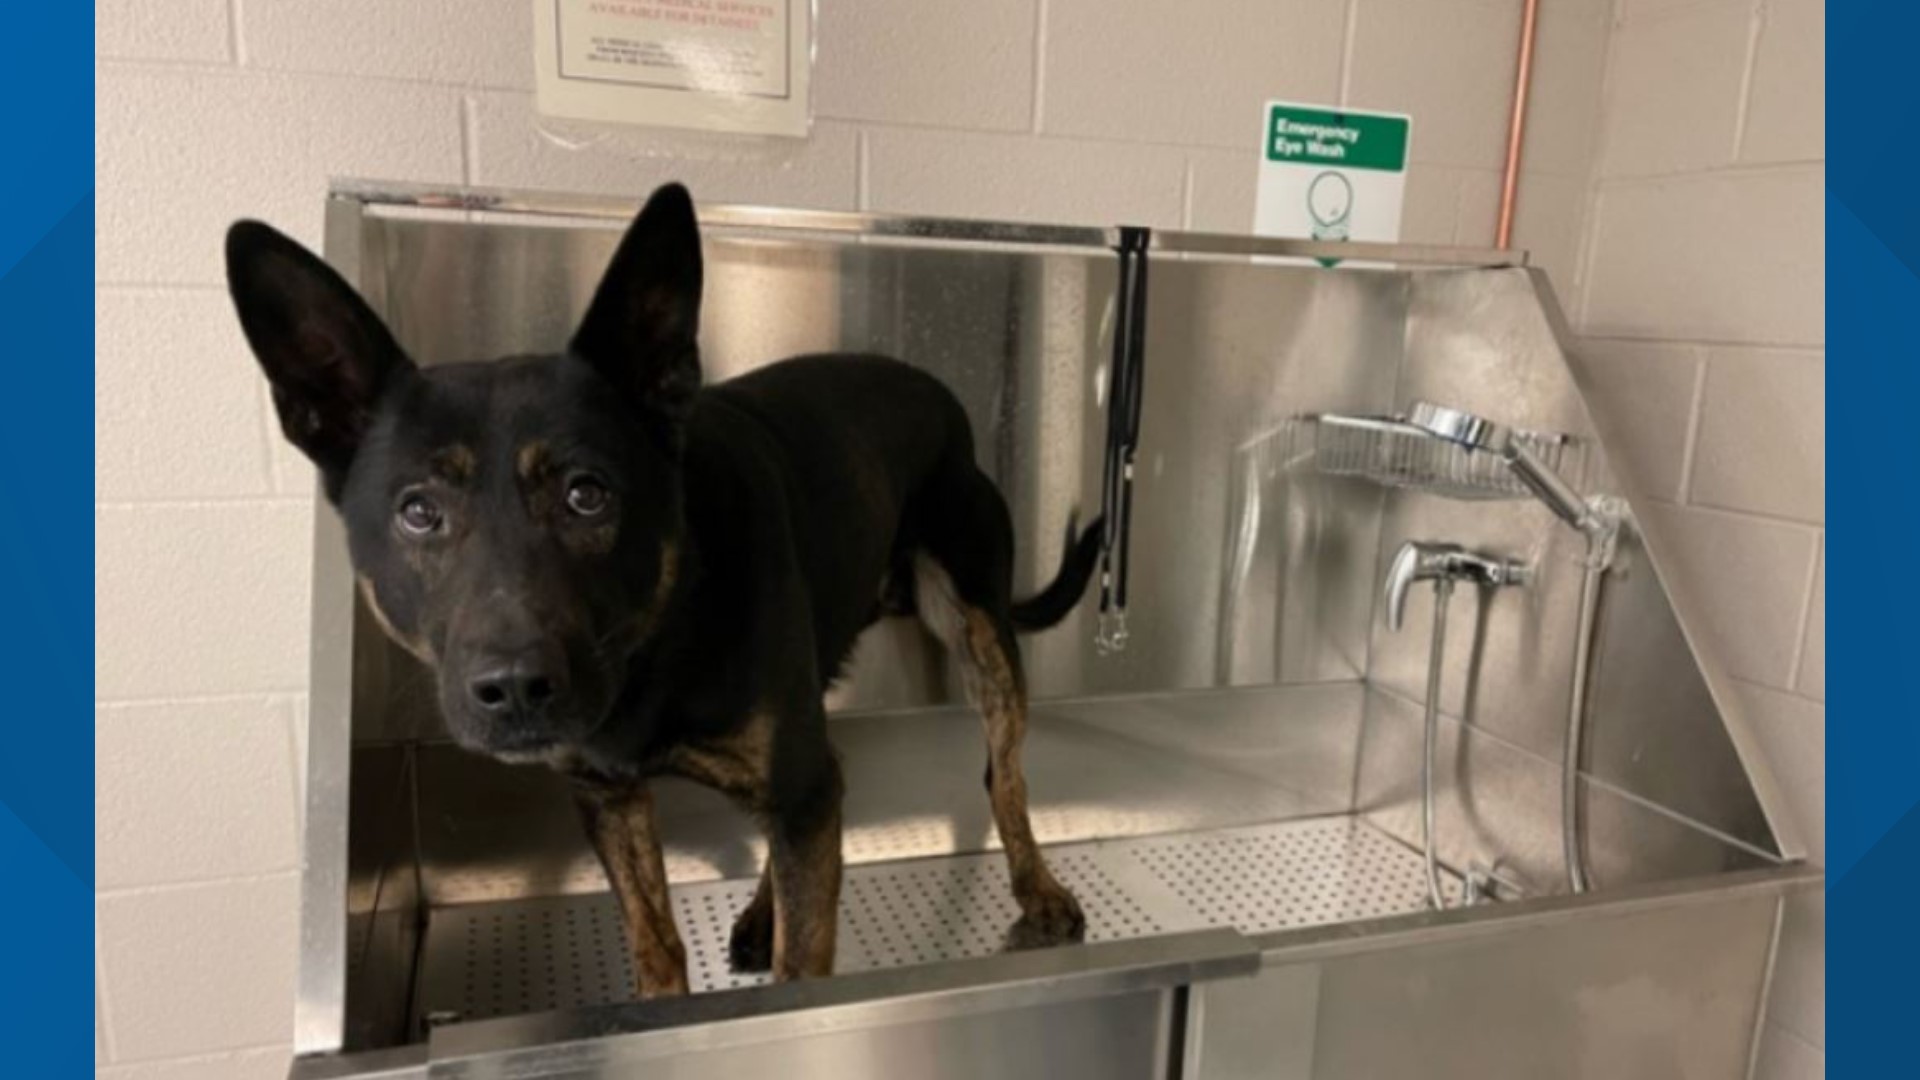 The police department's three K9 officers have already used their new bathing unit, which is open to K9s from other departments.